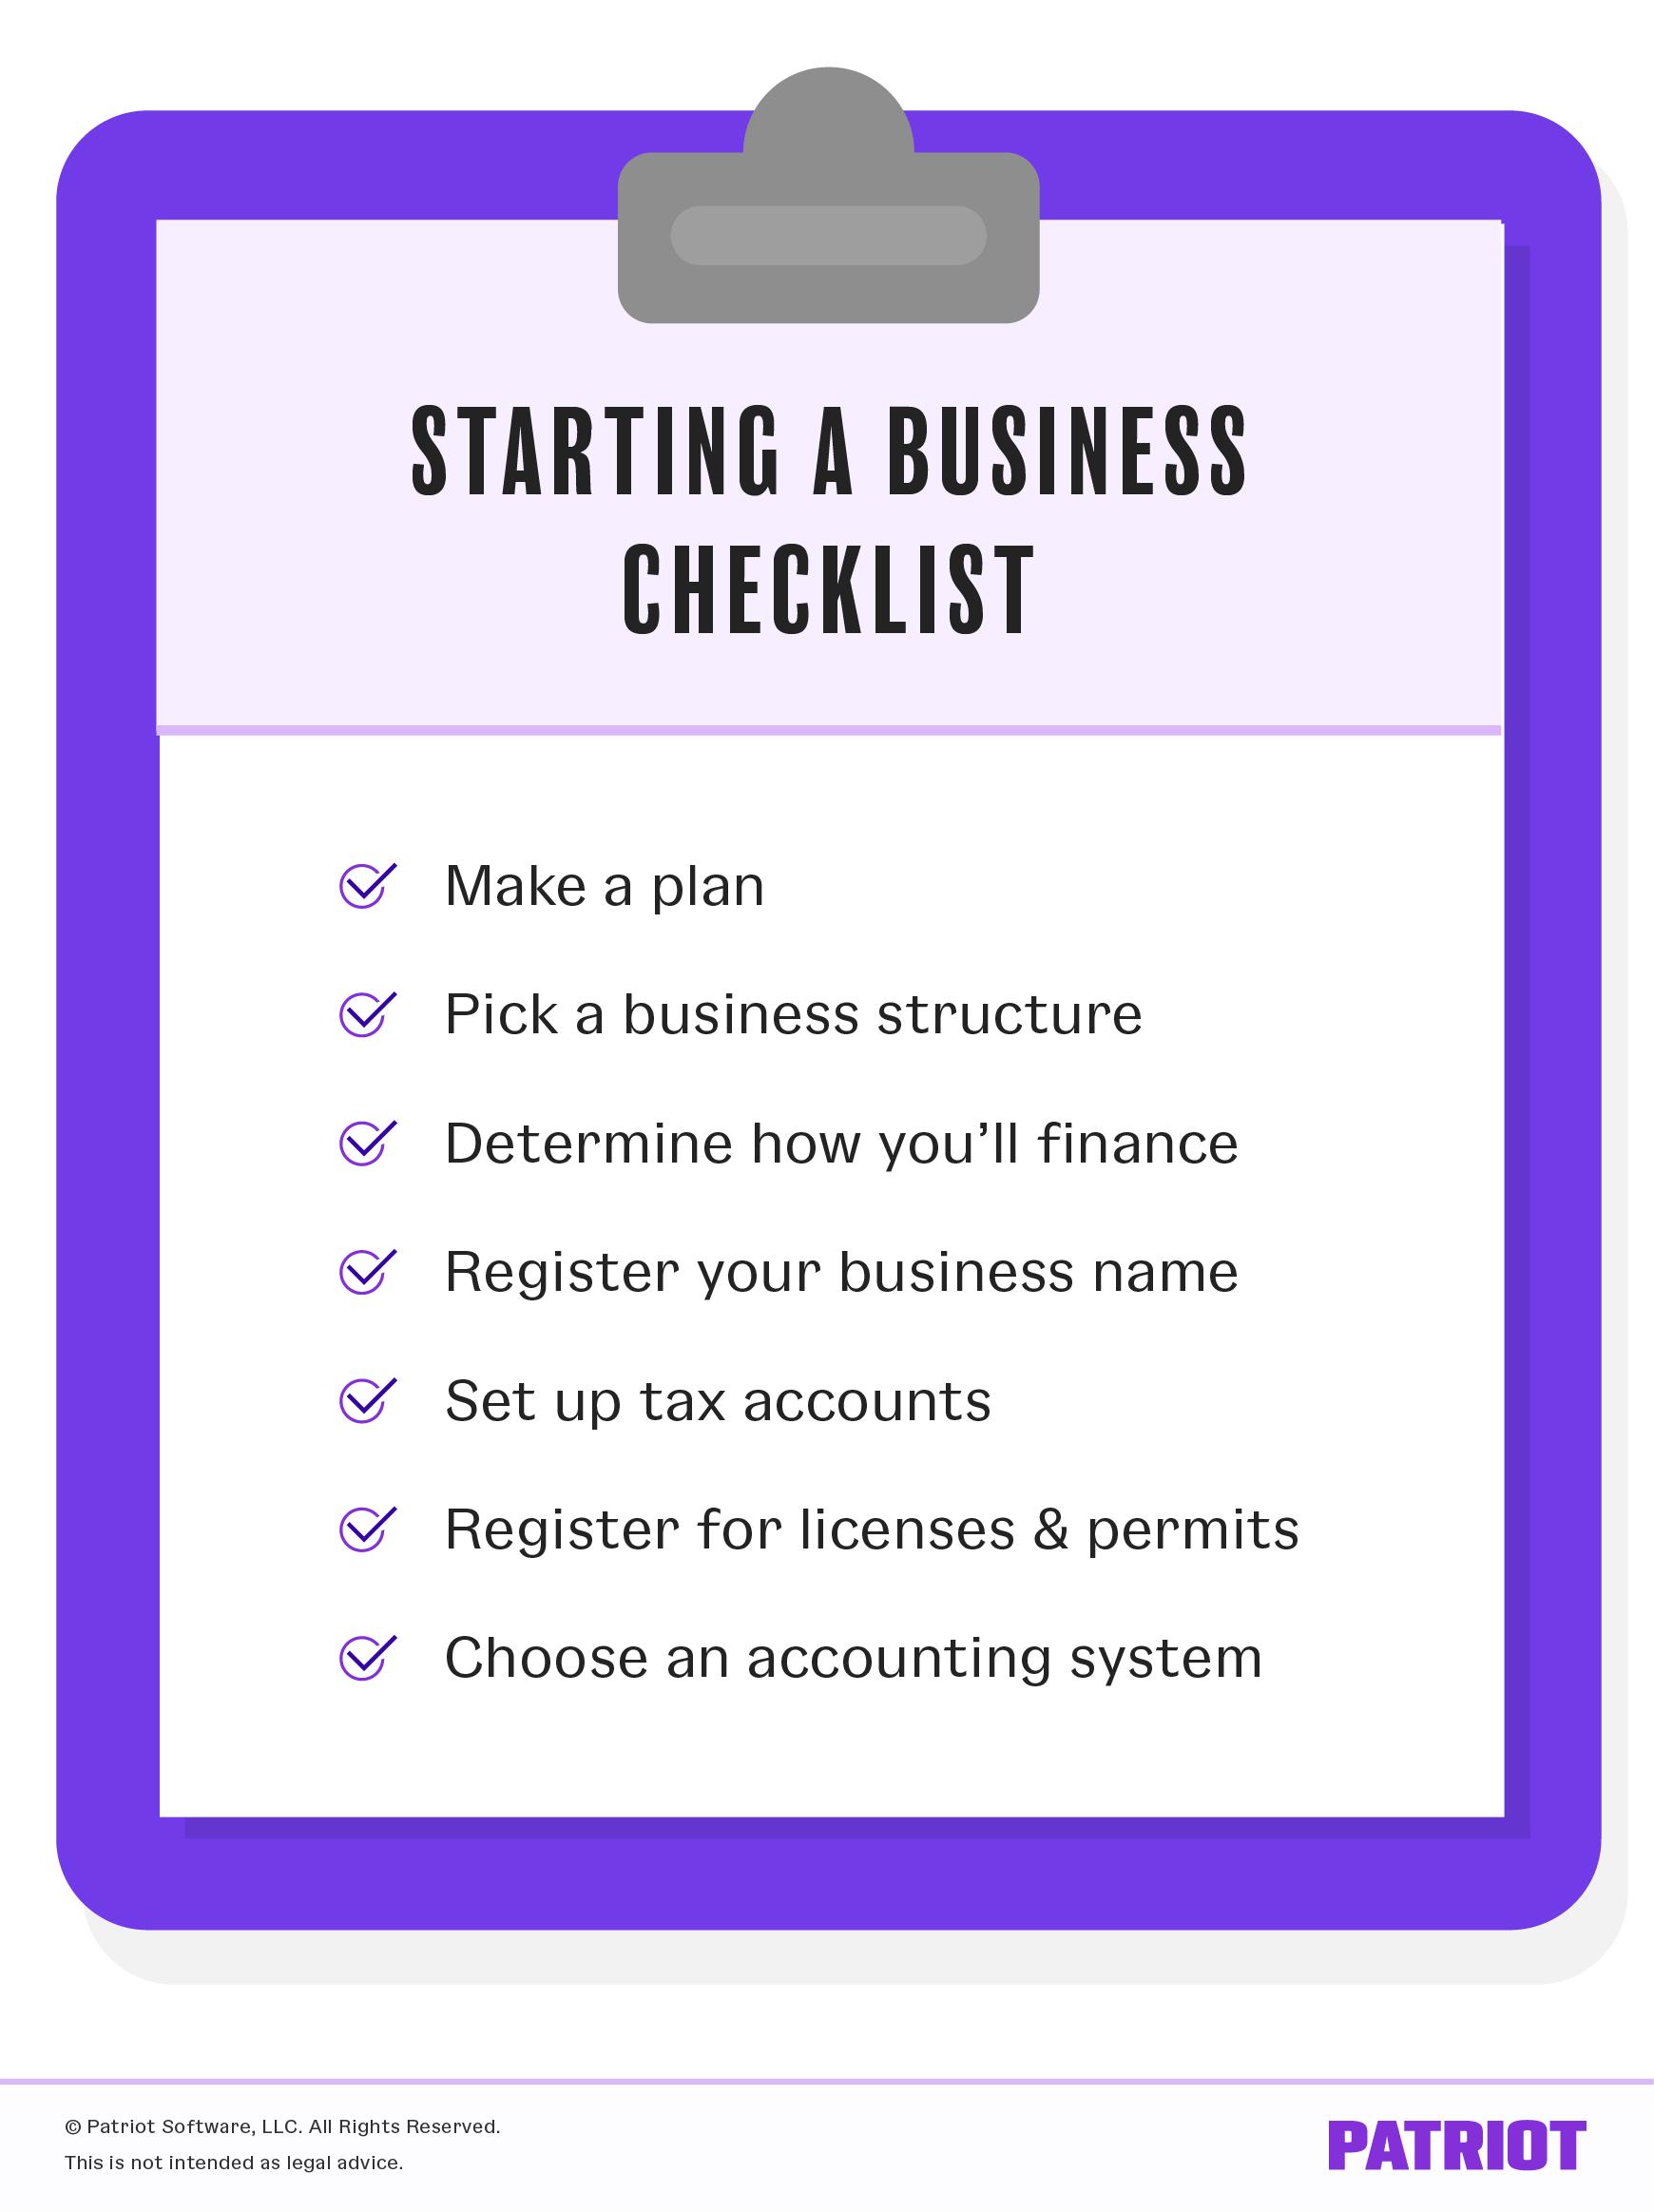 starting a business checklist: make a plan, pick a business structure, determine how you'll finance, register your business name, set up tax accounts, register for licenses and permits, choose an accounting system